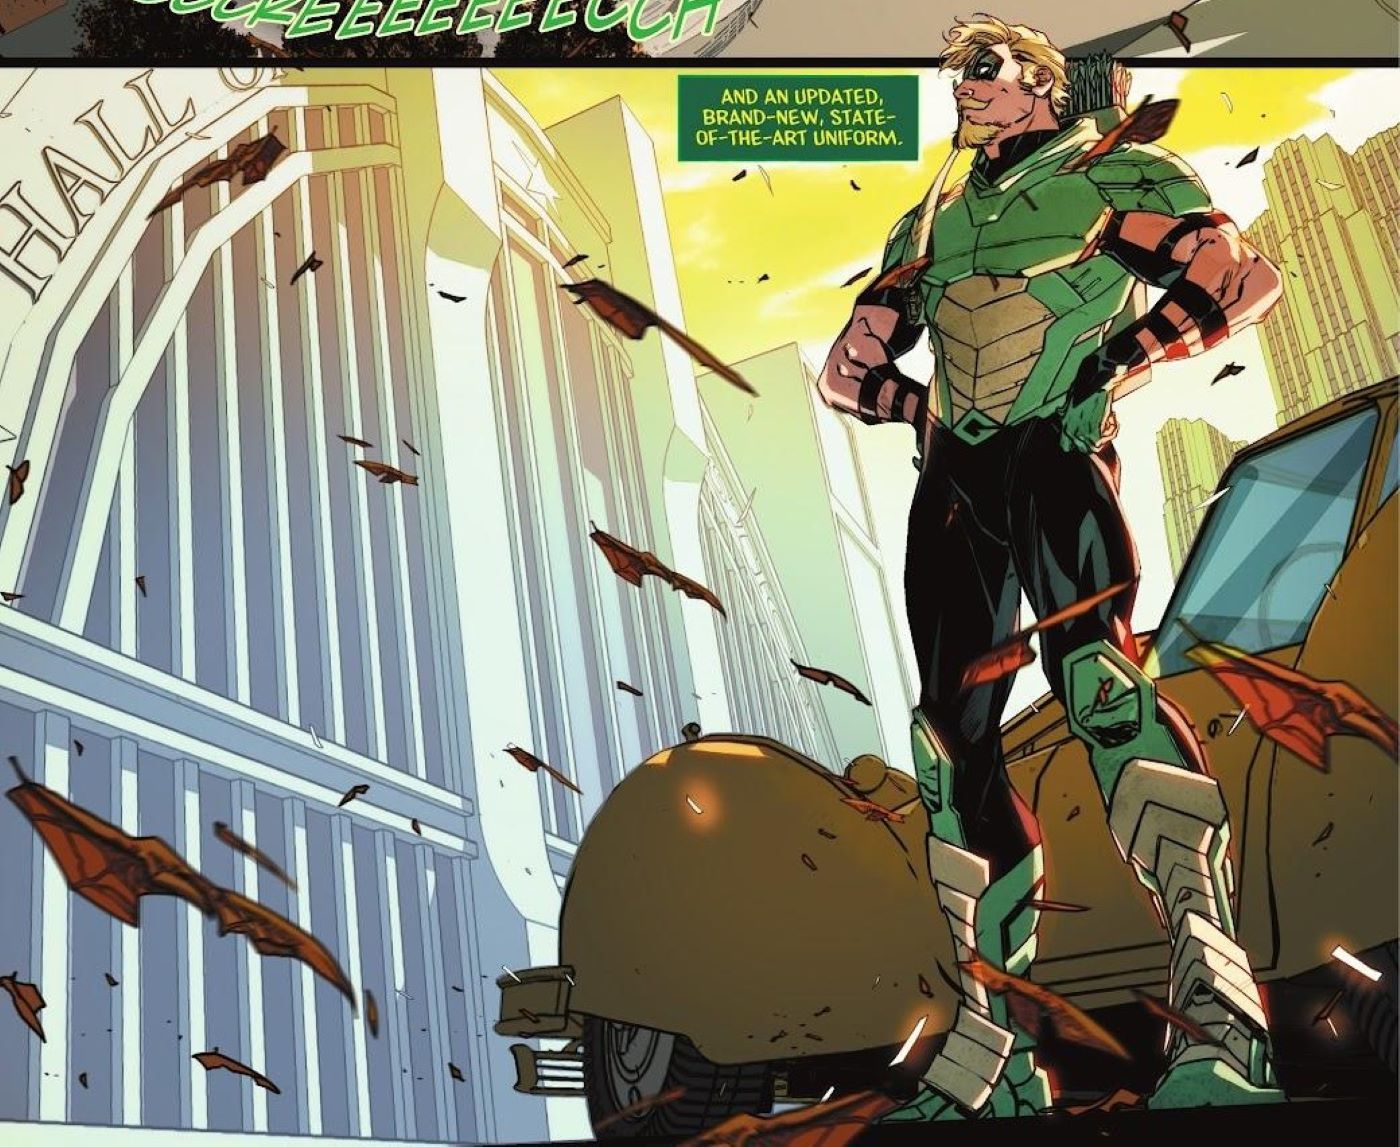 Green Arrow #7 featuring Oliver with his new uniform